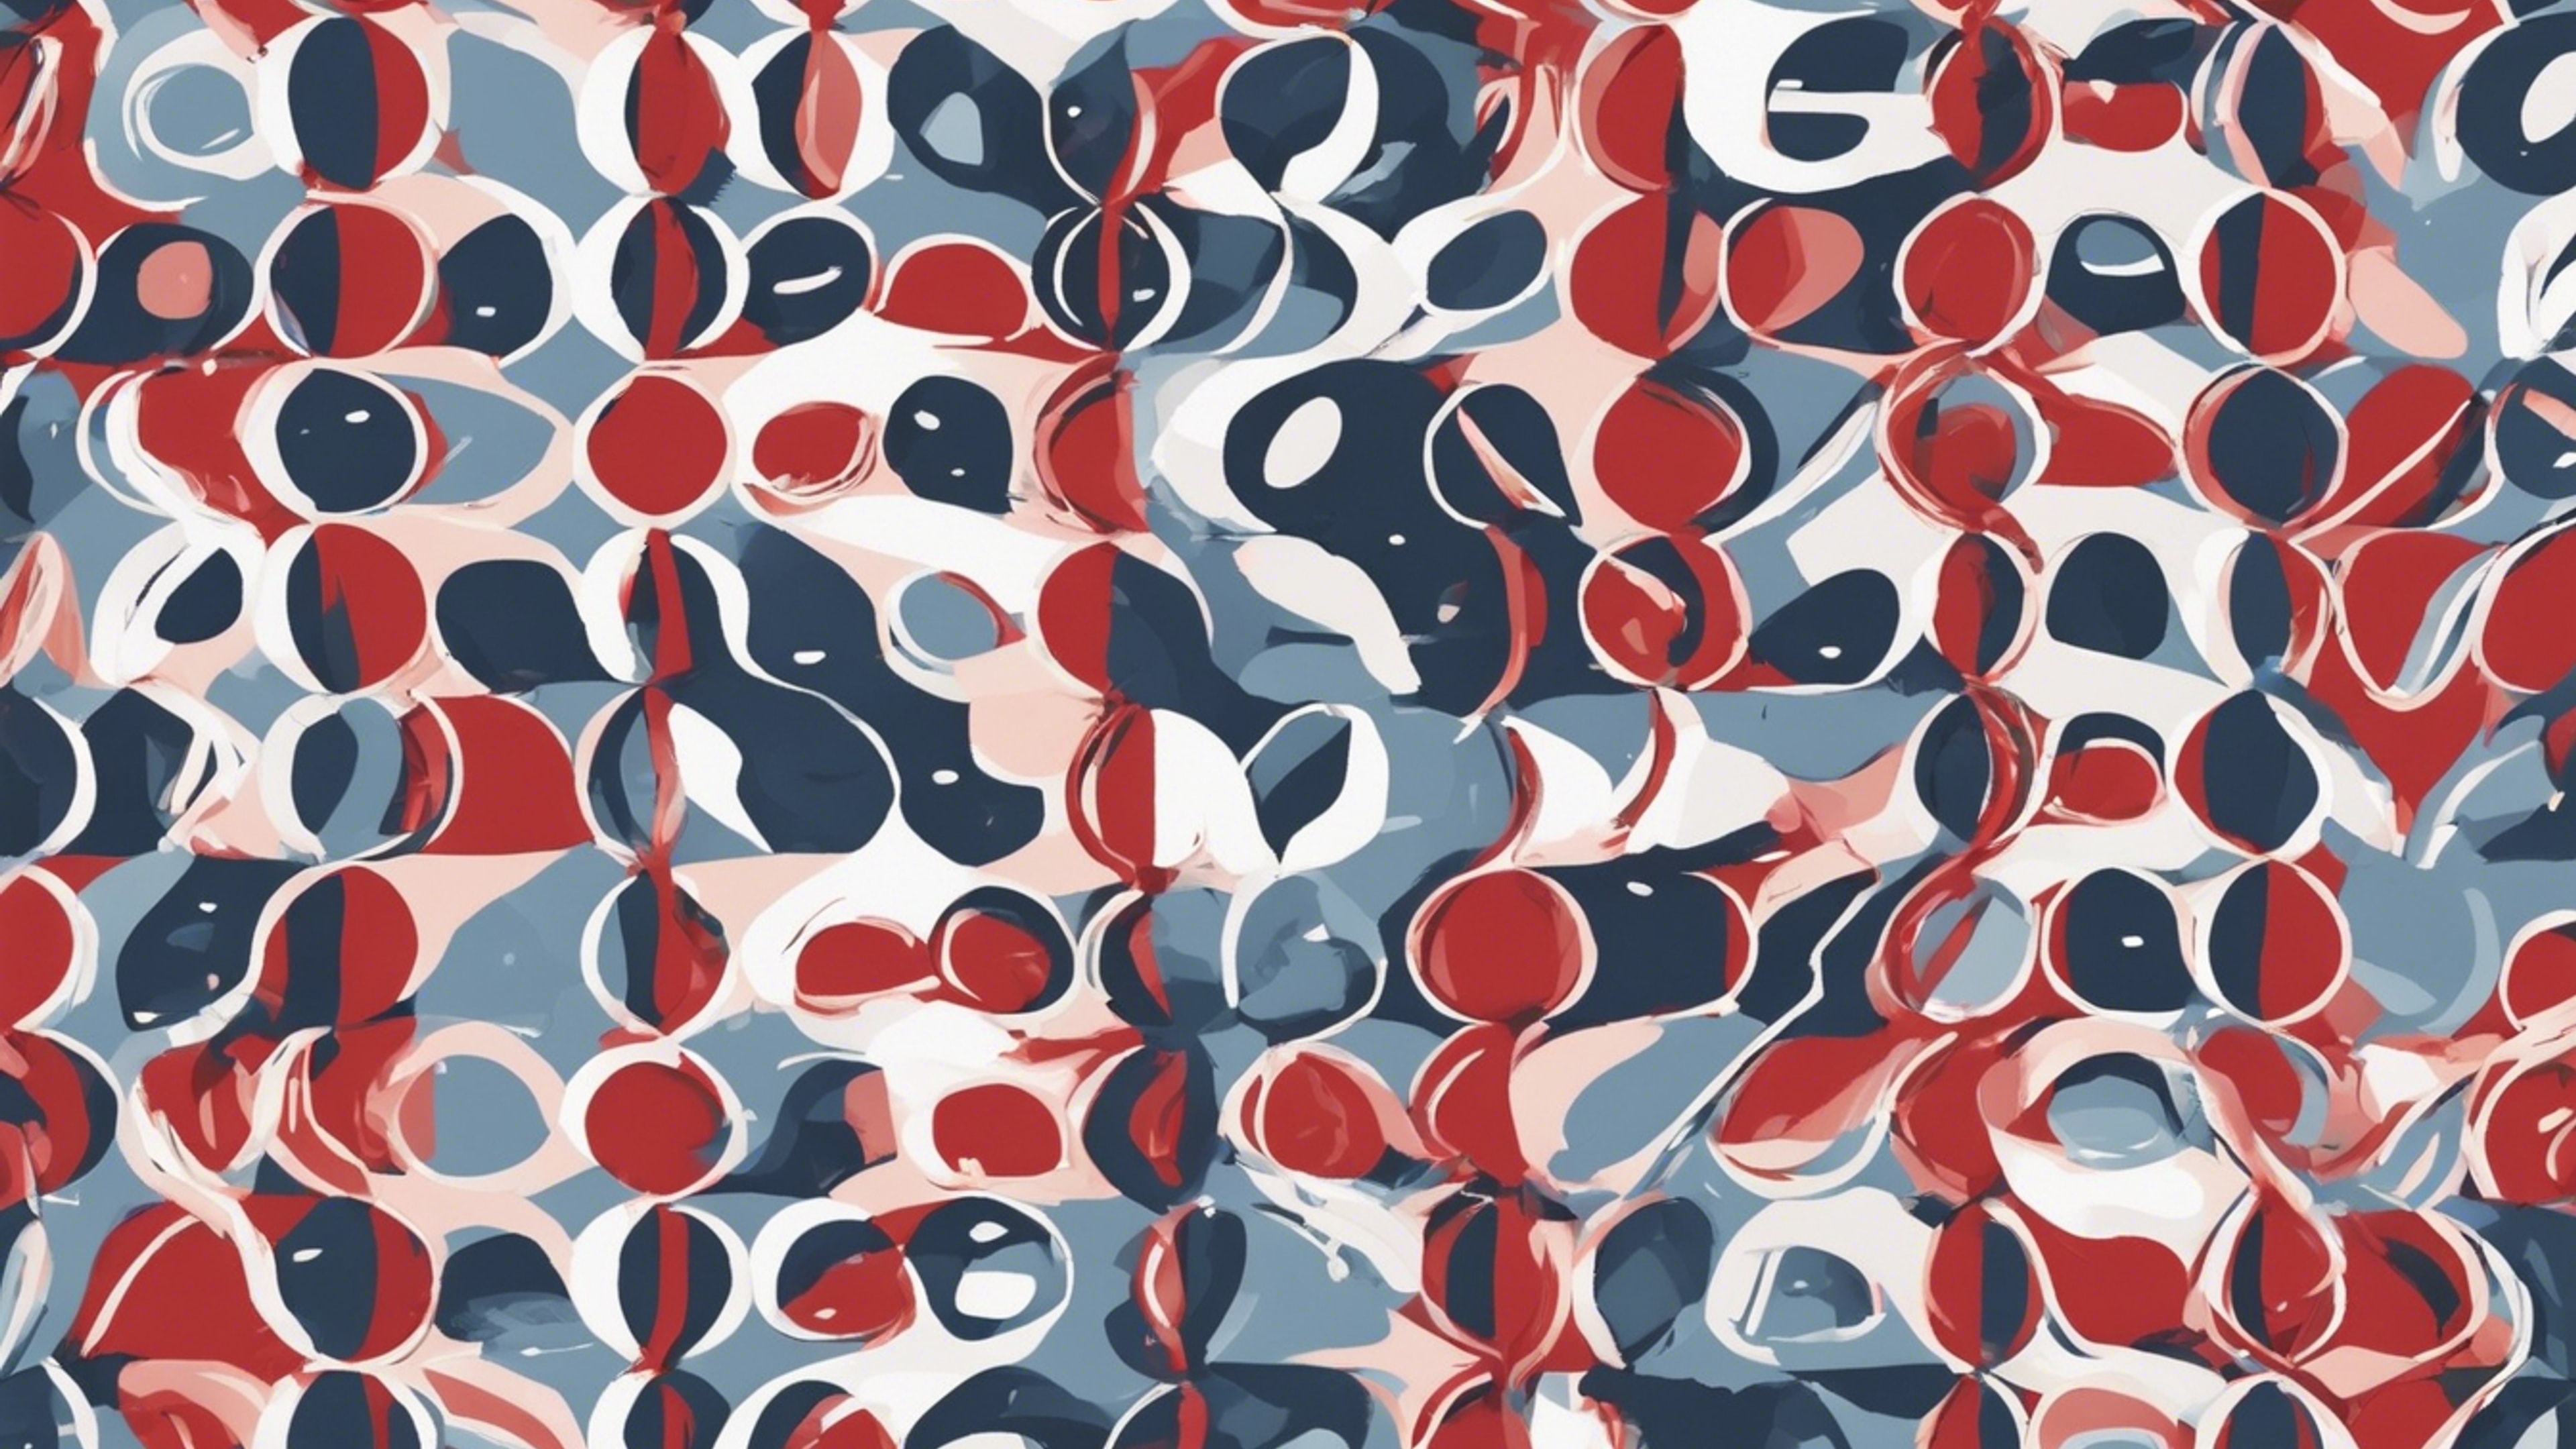 Simple and clean Scandinavian red and blue pattern. Behang[367ad8fa403444a2bdd2]